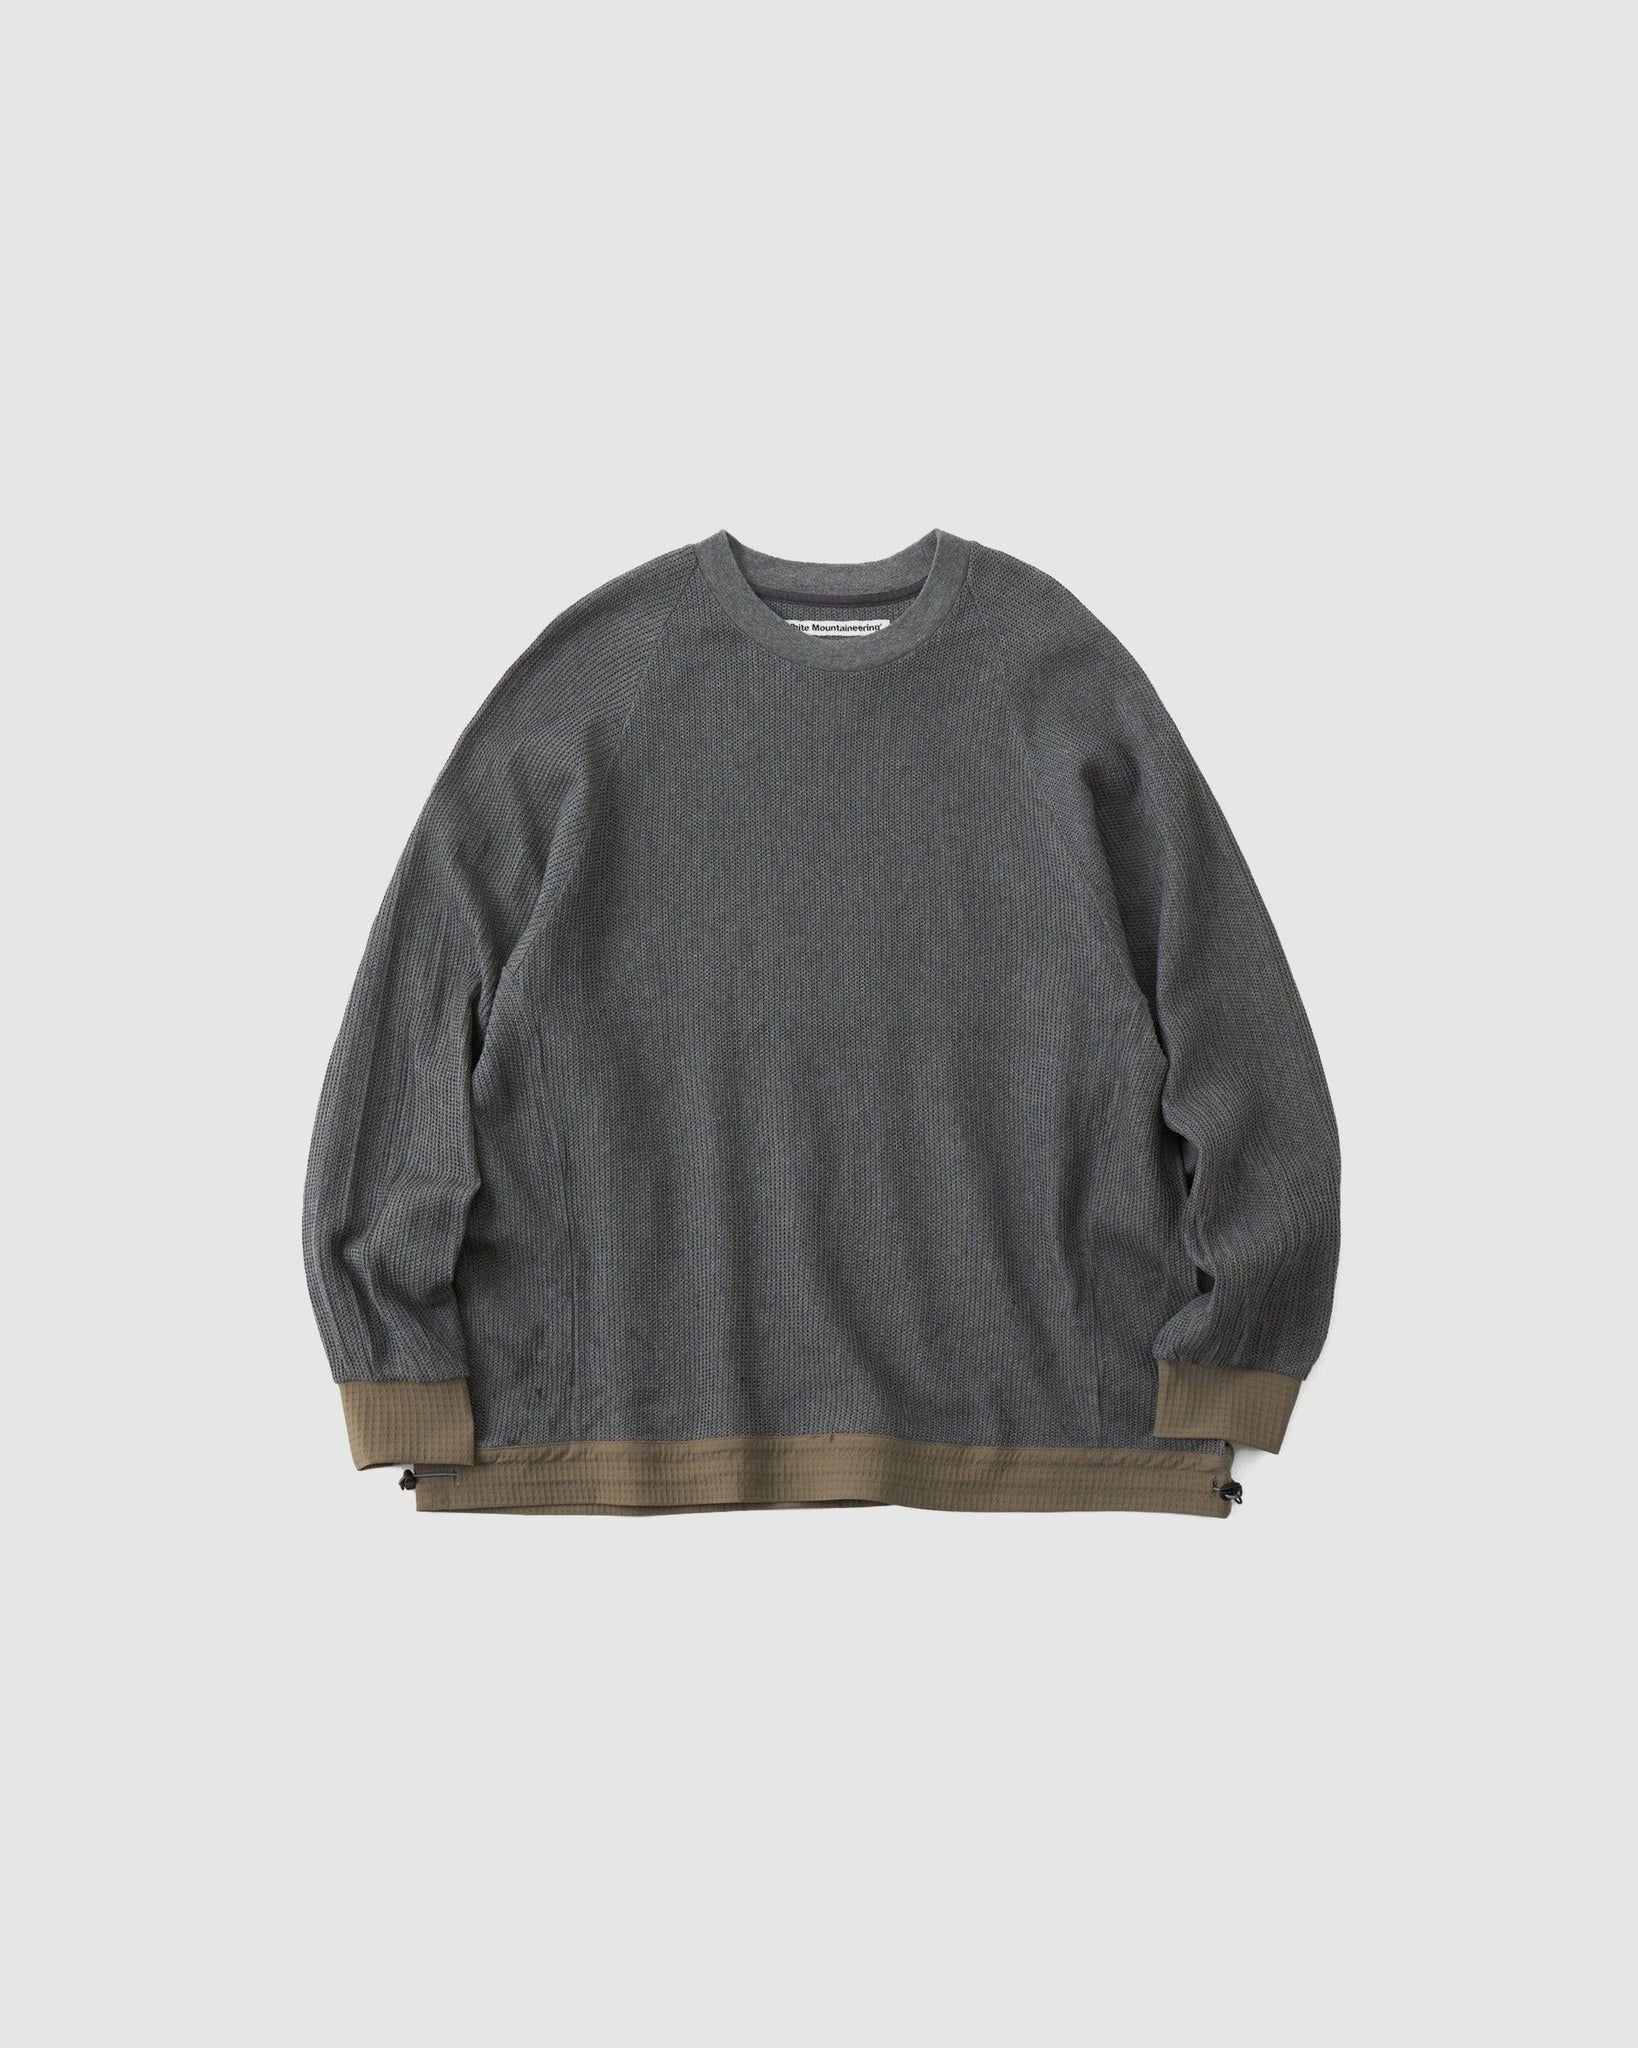 Raschel Raglan Pullover - {{ collection.title }} - Chinatown Country Club 